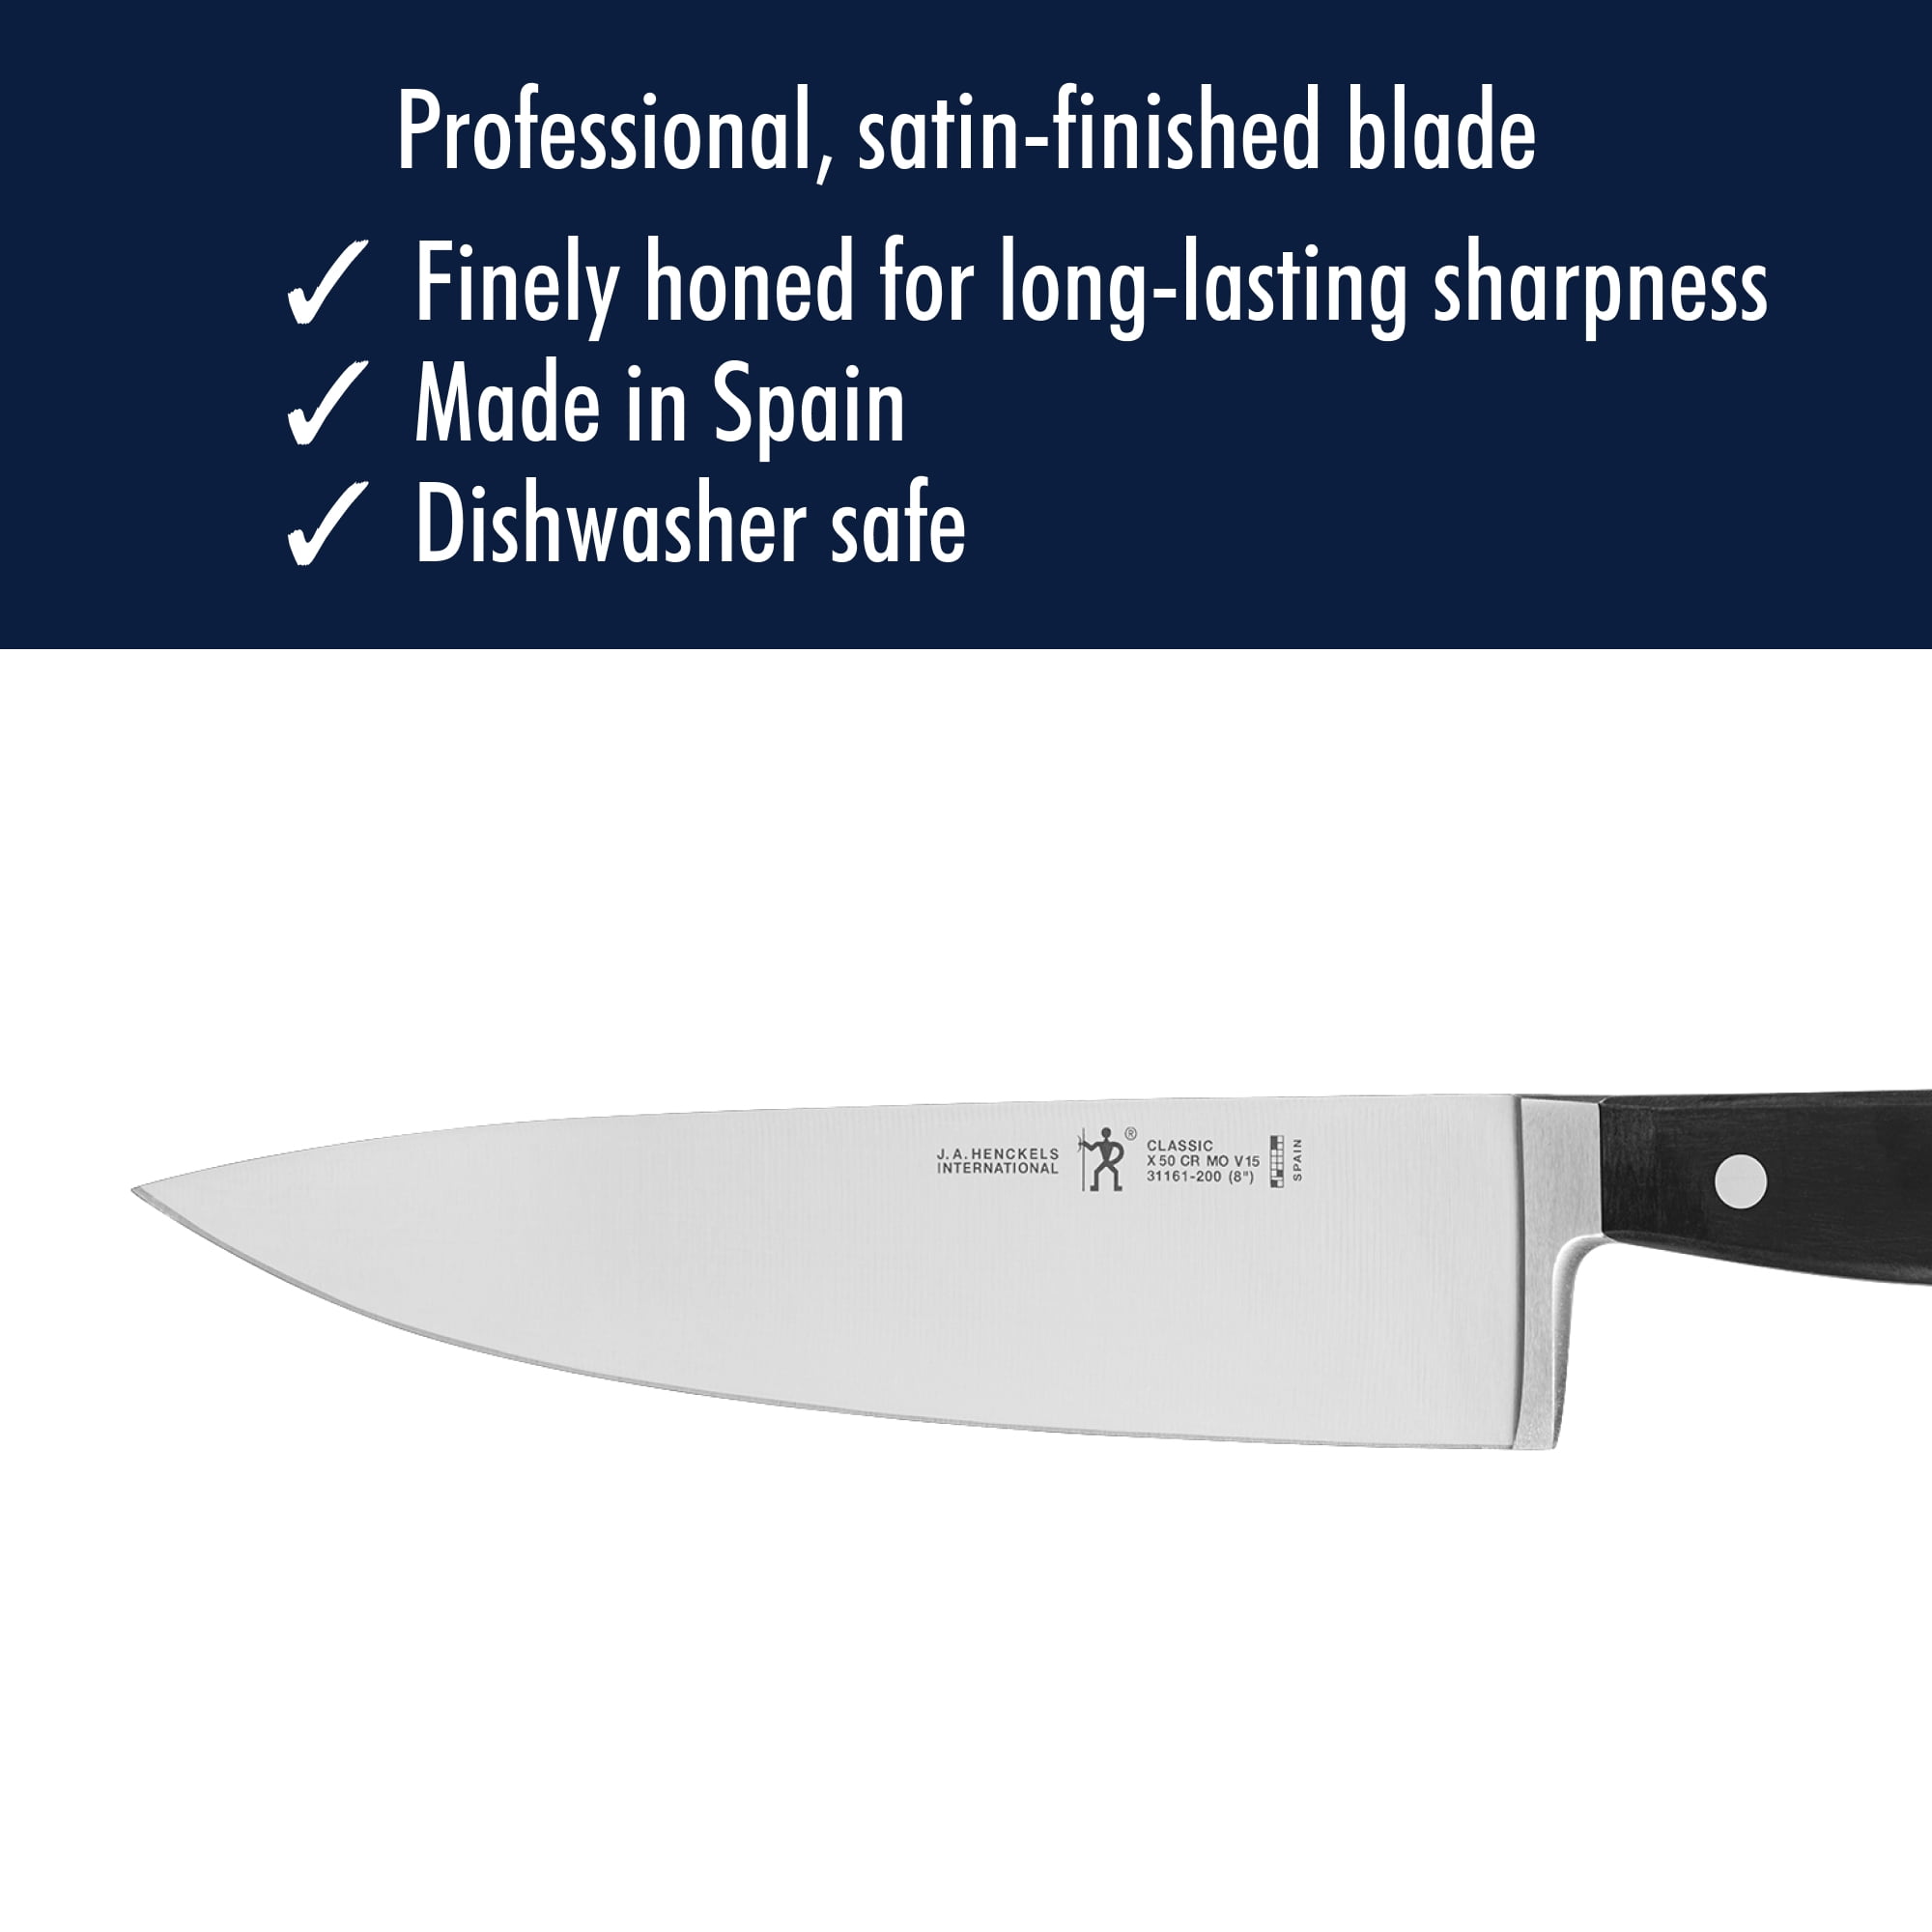 Henckels CLASSIC 8 in. Carving Knife 31160-201 - The Home Depot